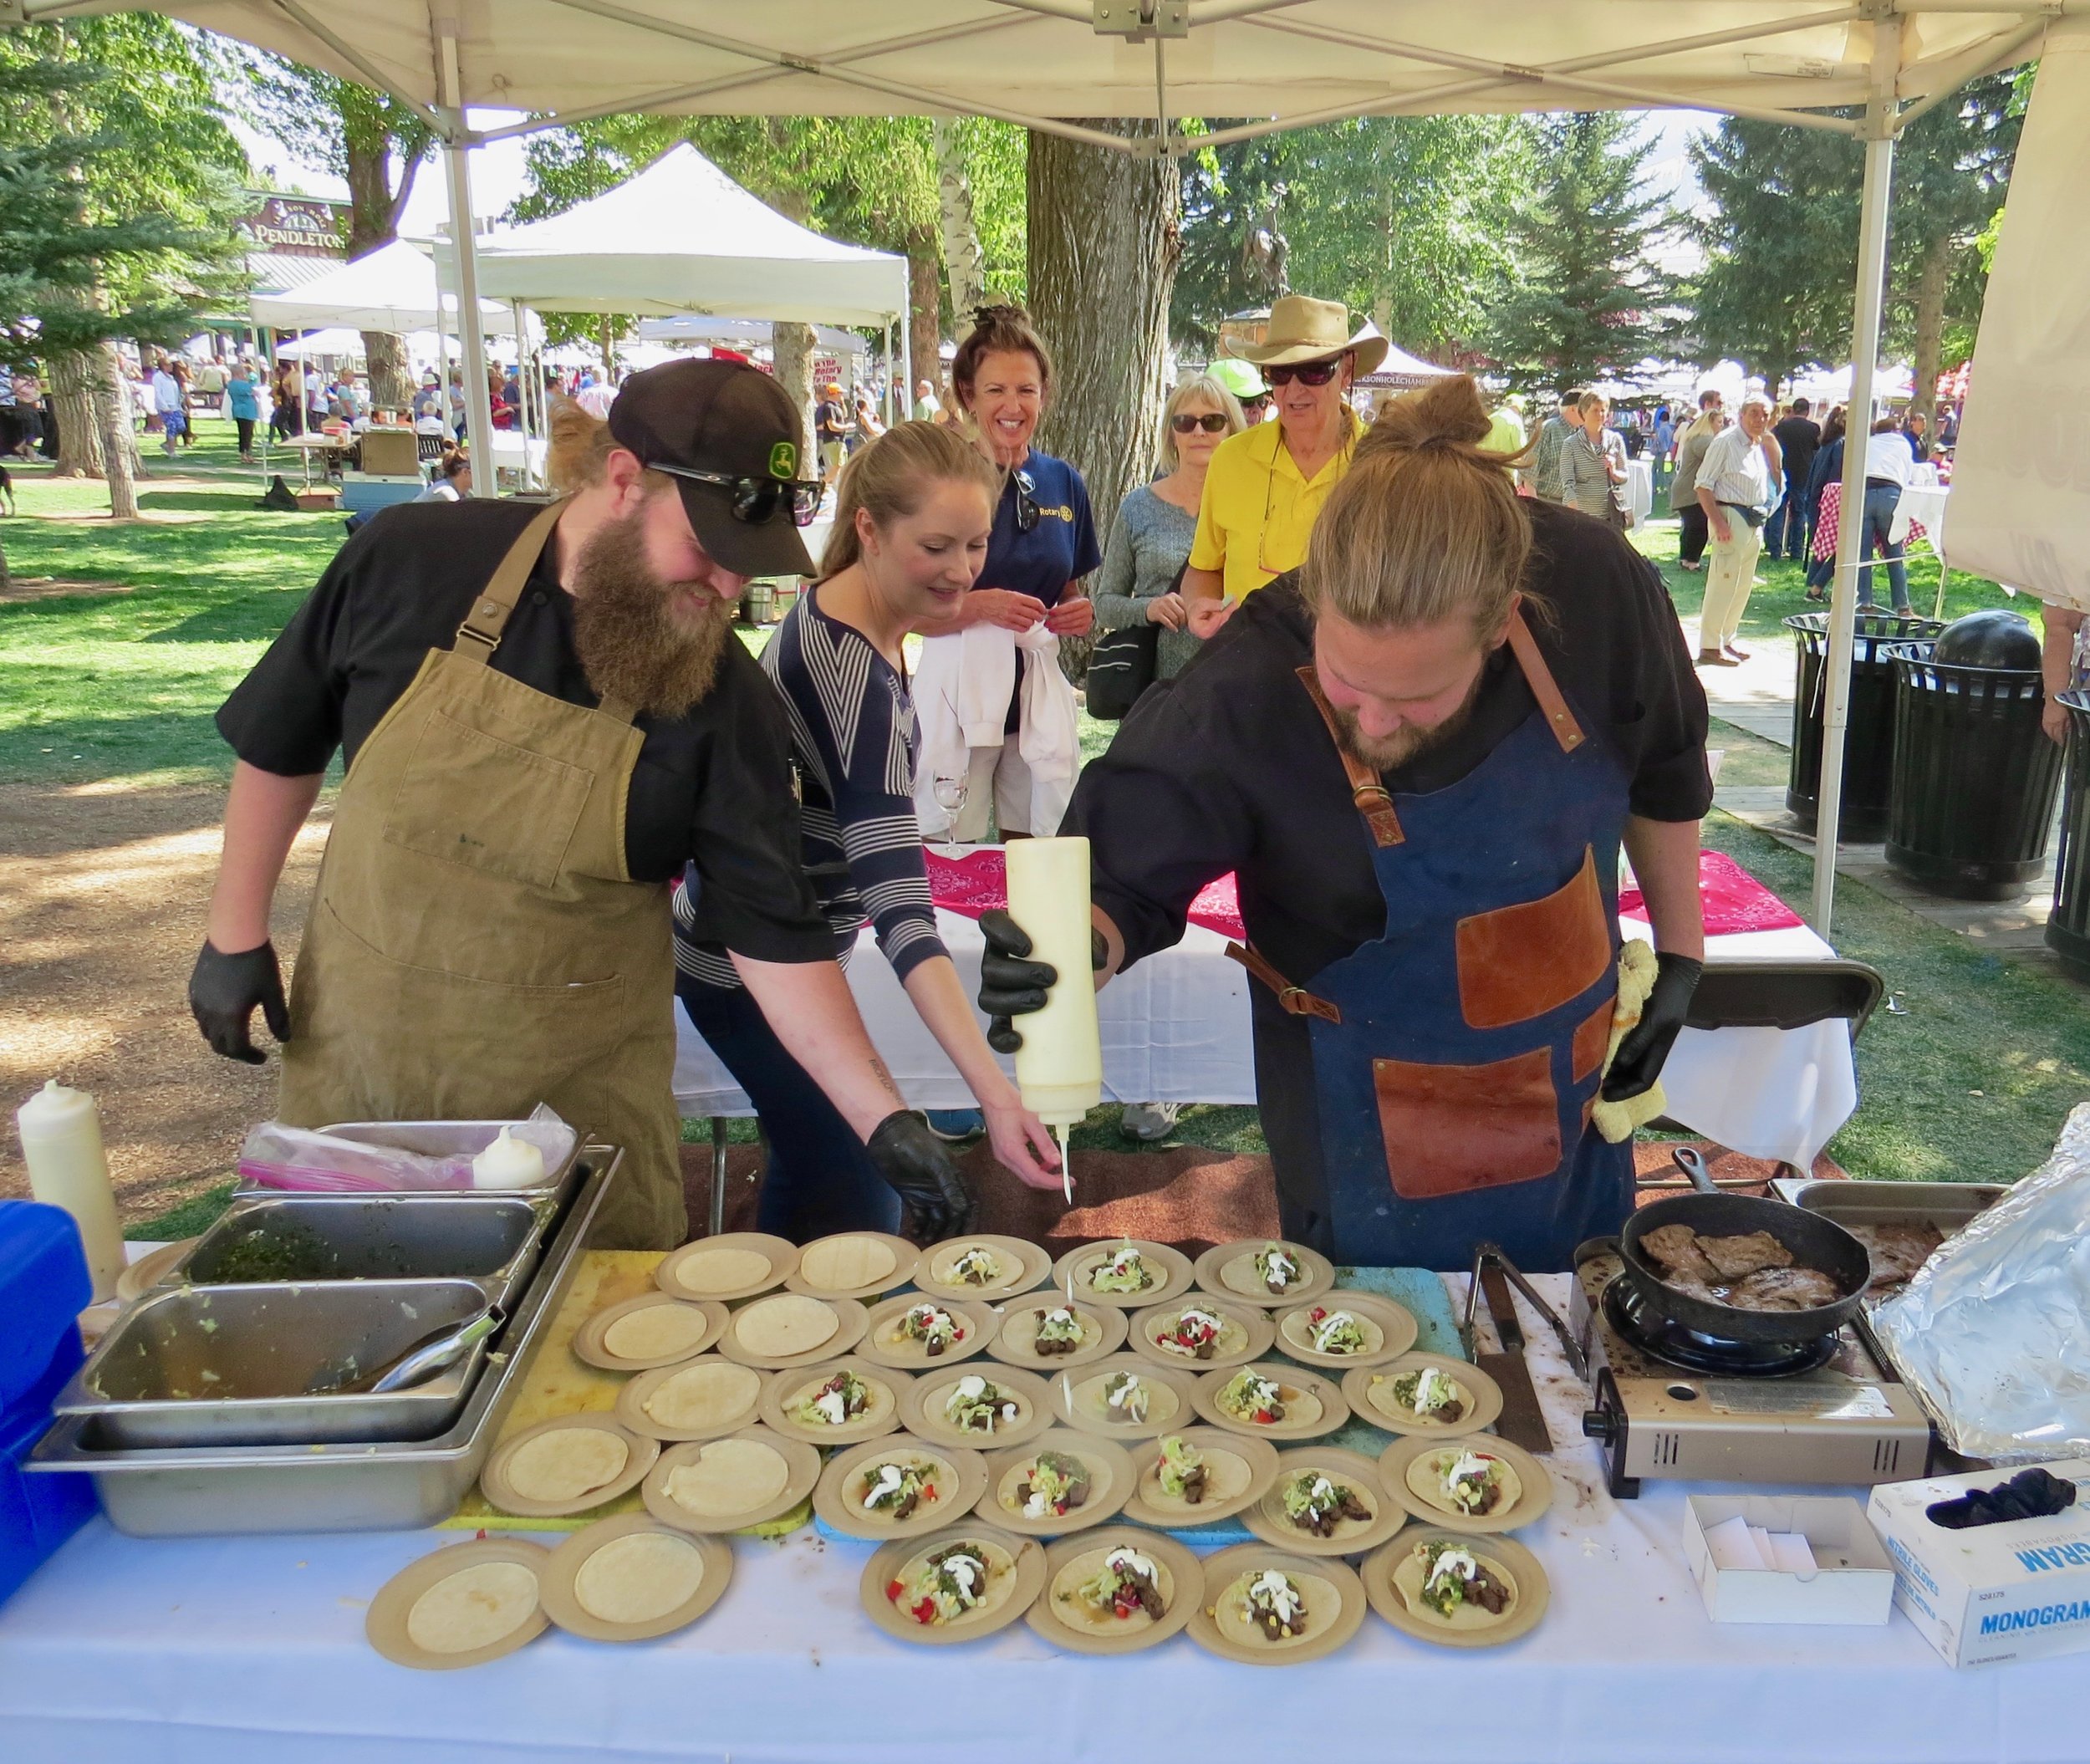 Taste of the Tetons, a sampling of cuisine from local chefs and restaurants